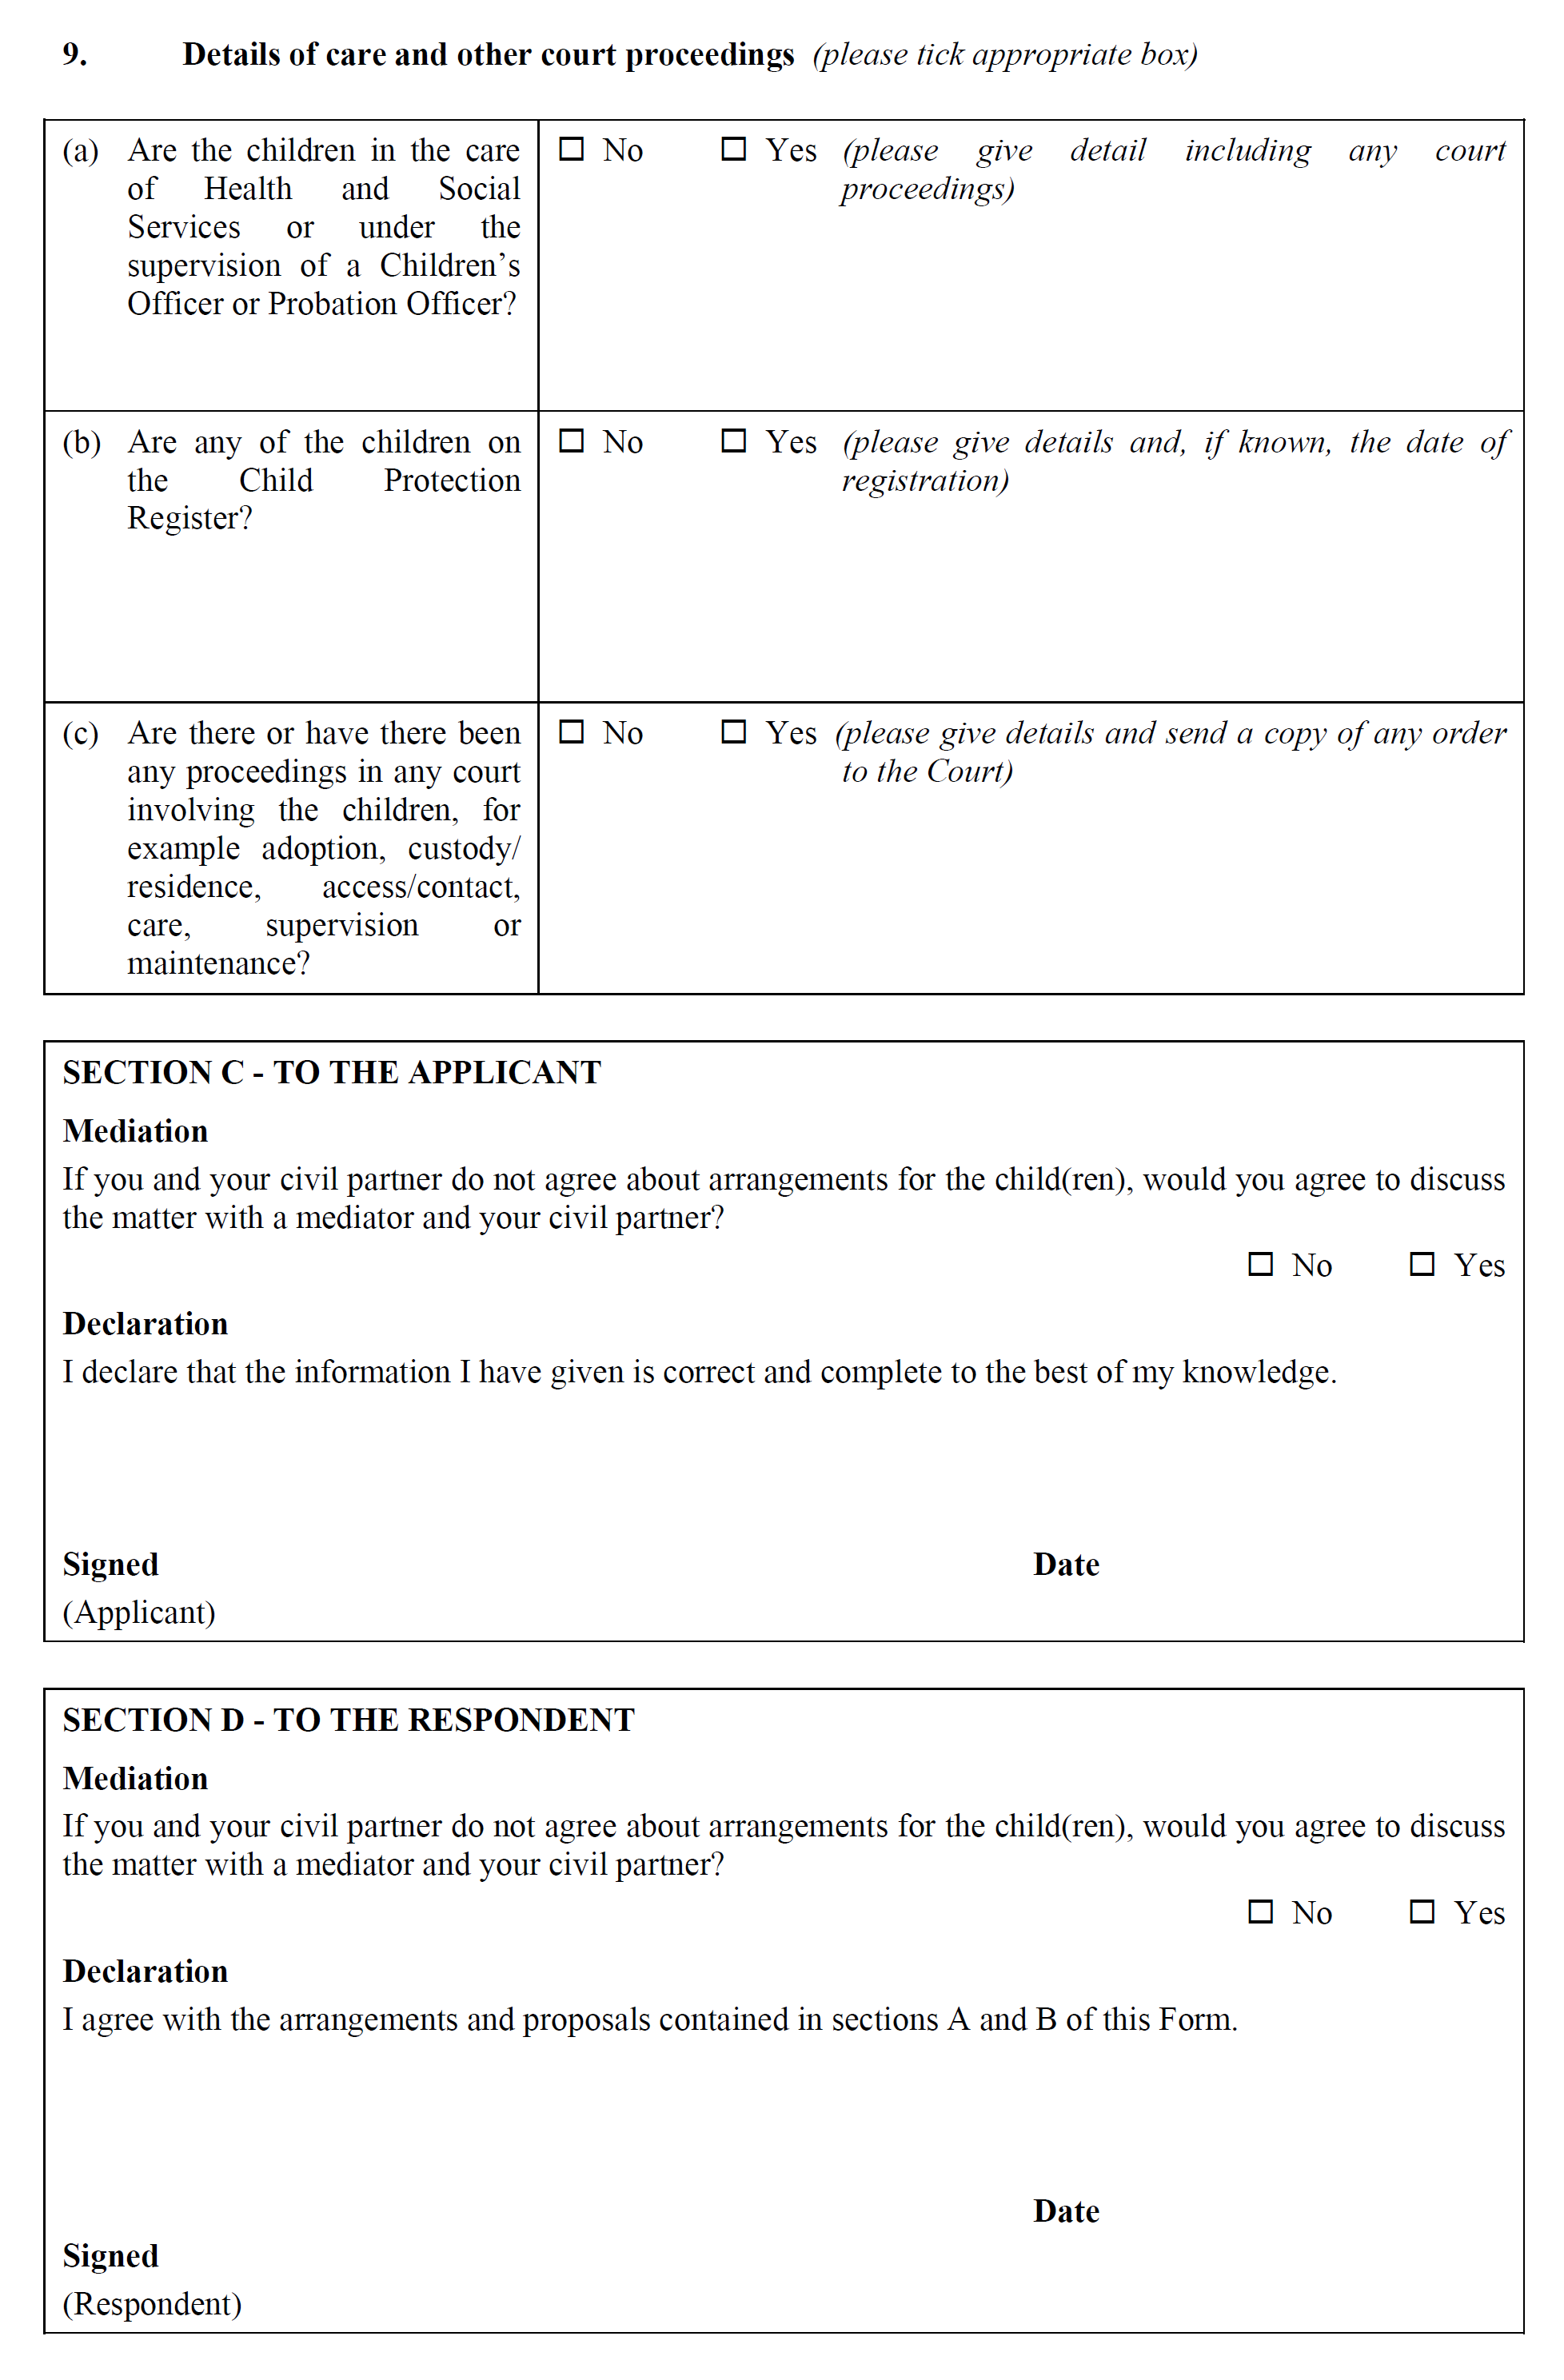 Form CP5 - Statement as to arrangements for children - continued